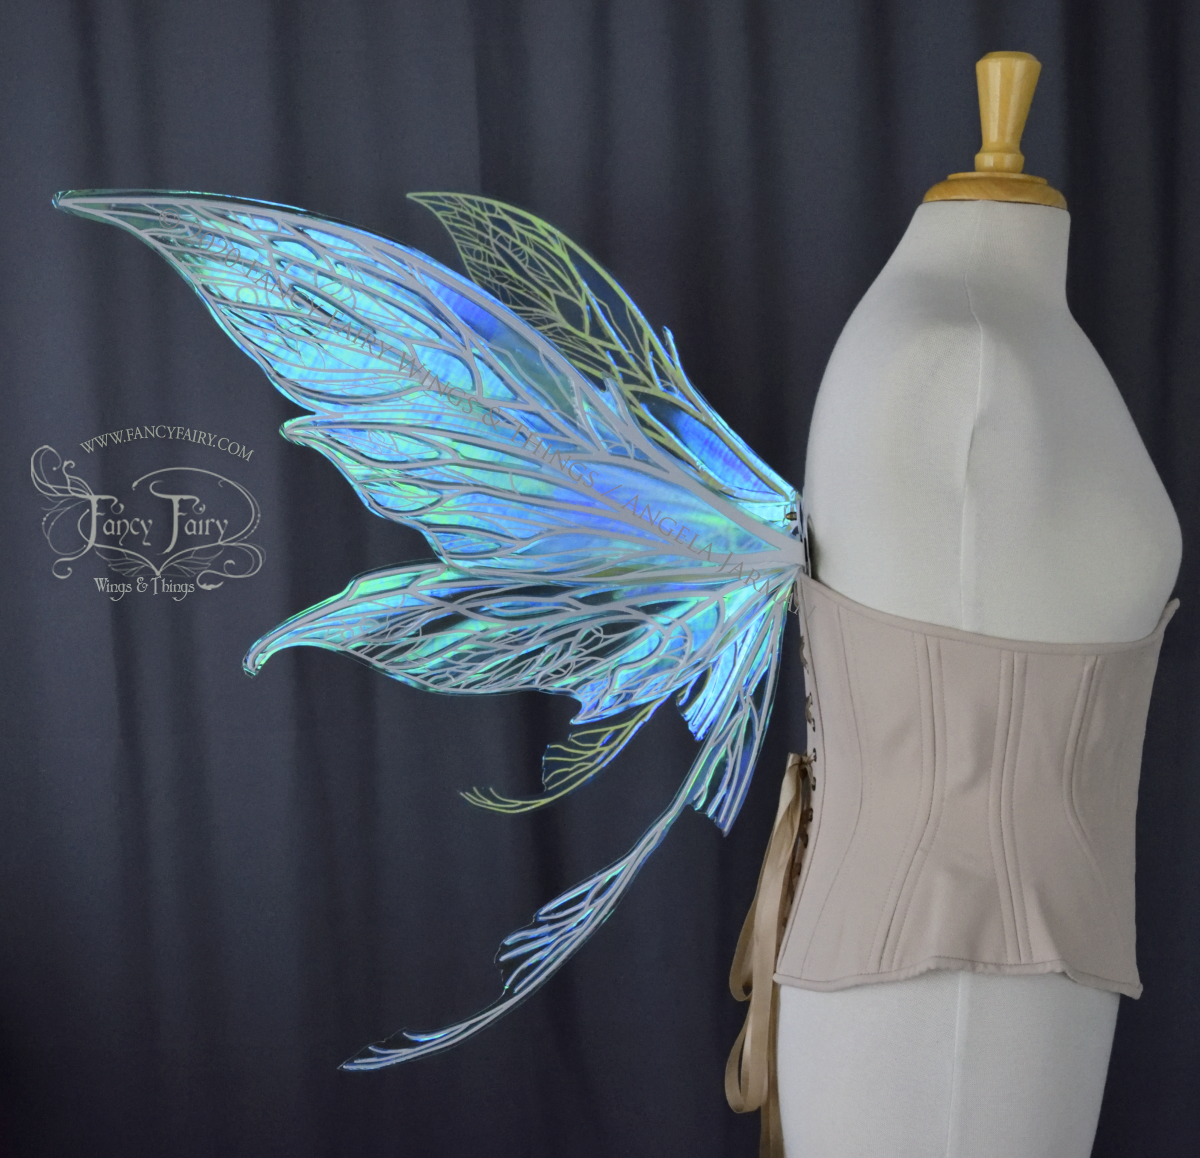 Colette Convertible Iridescent "Pix" Fairy Wings in Absinthe with white veins